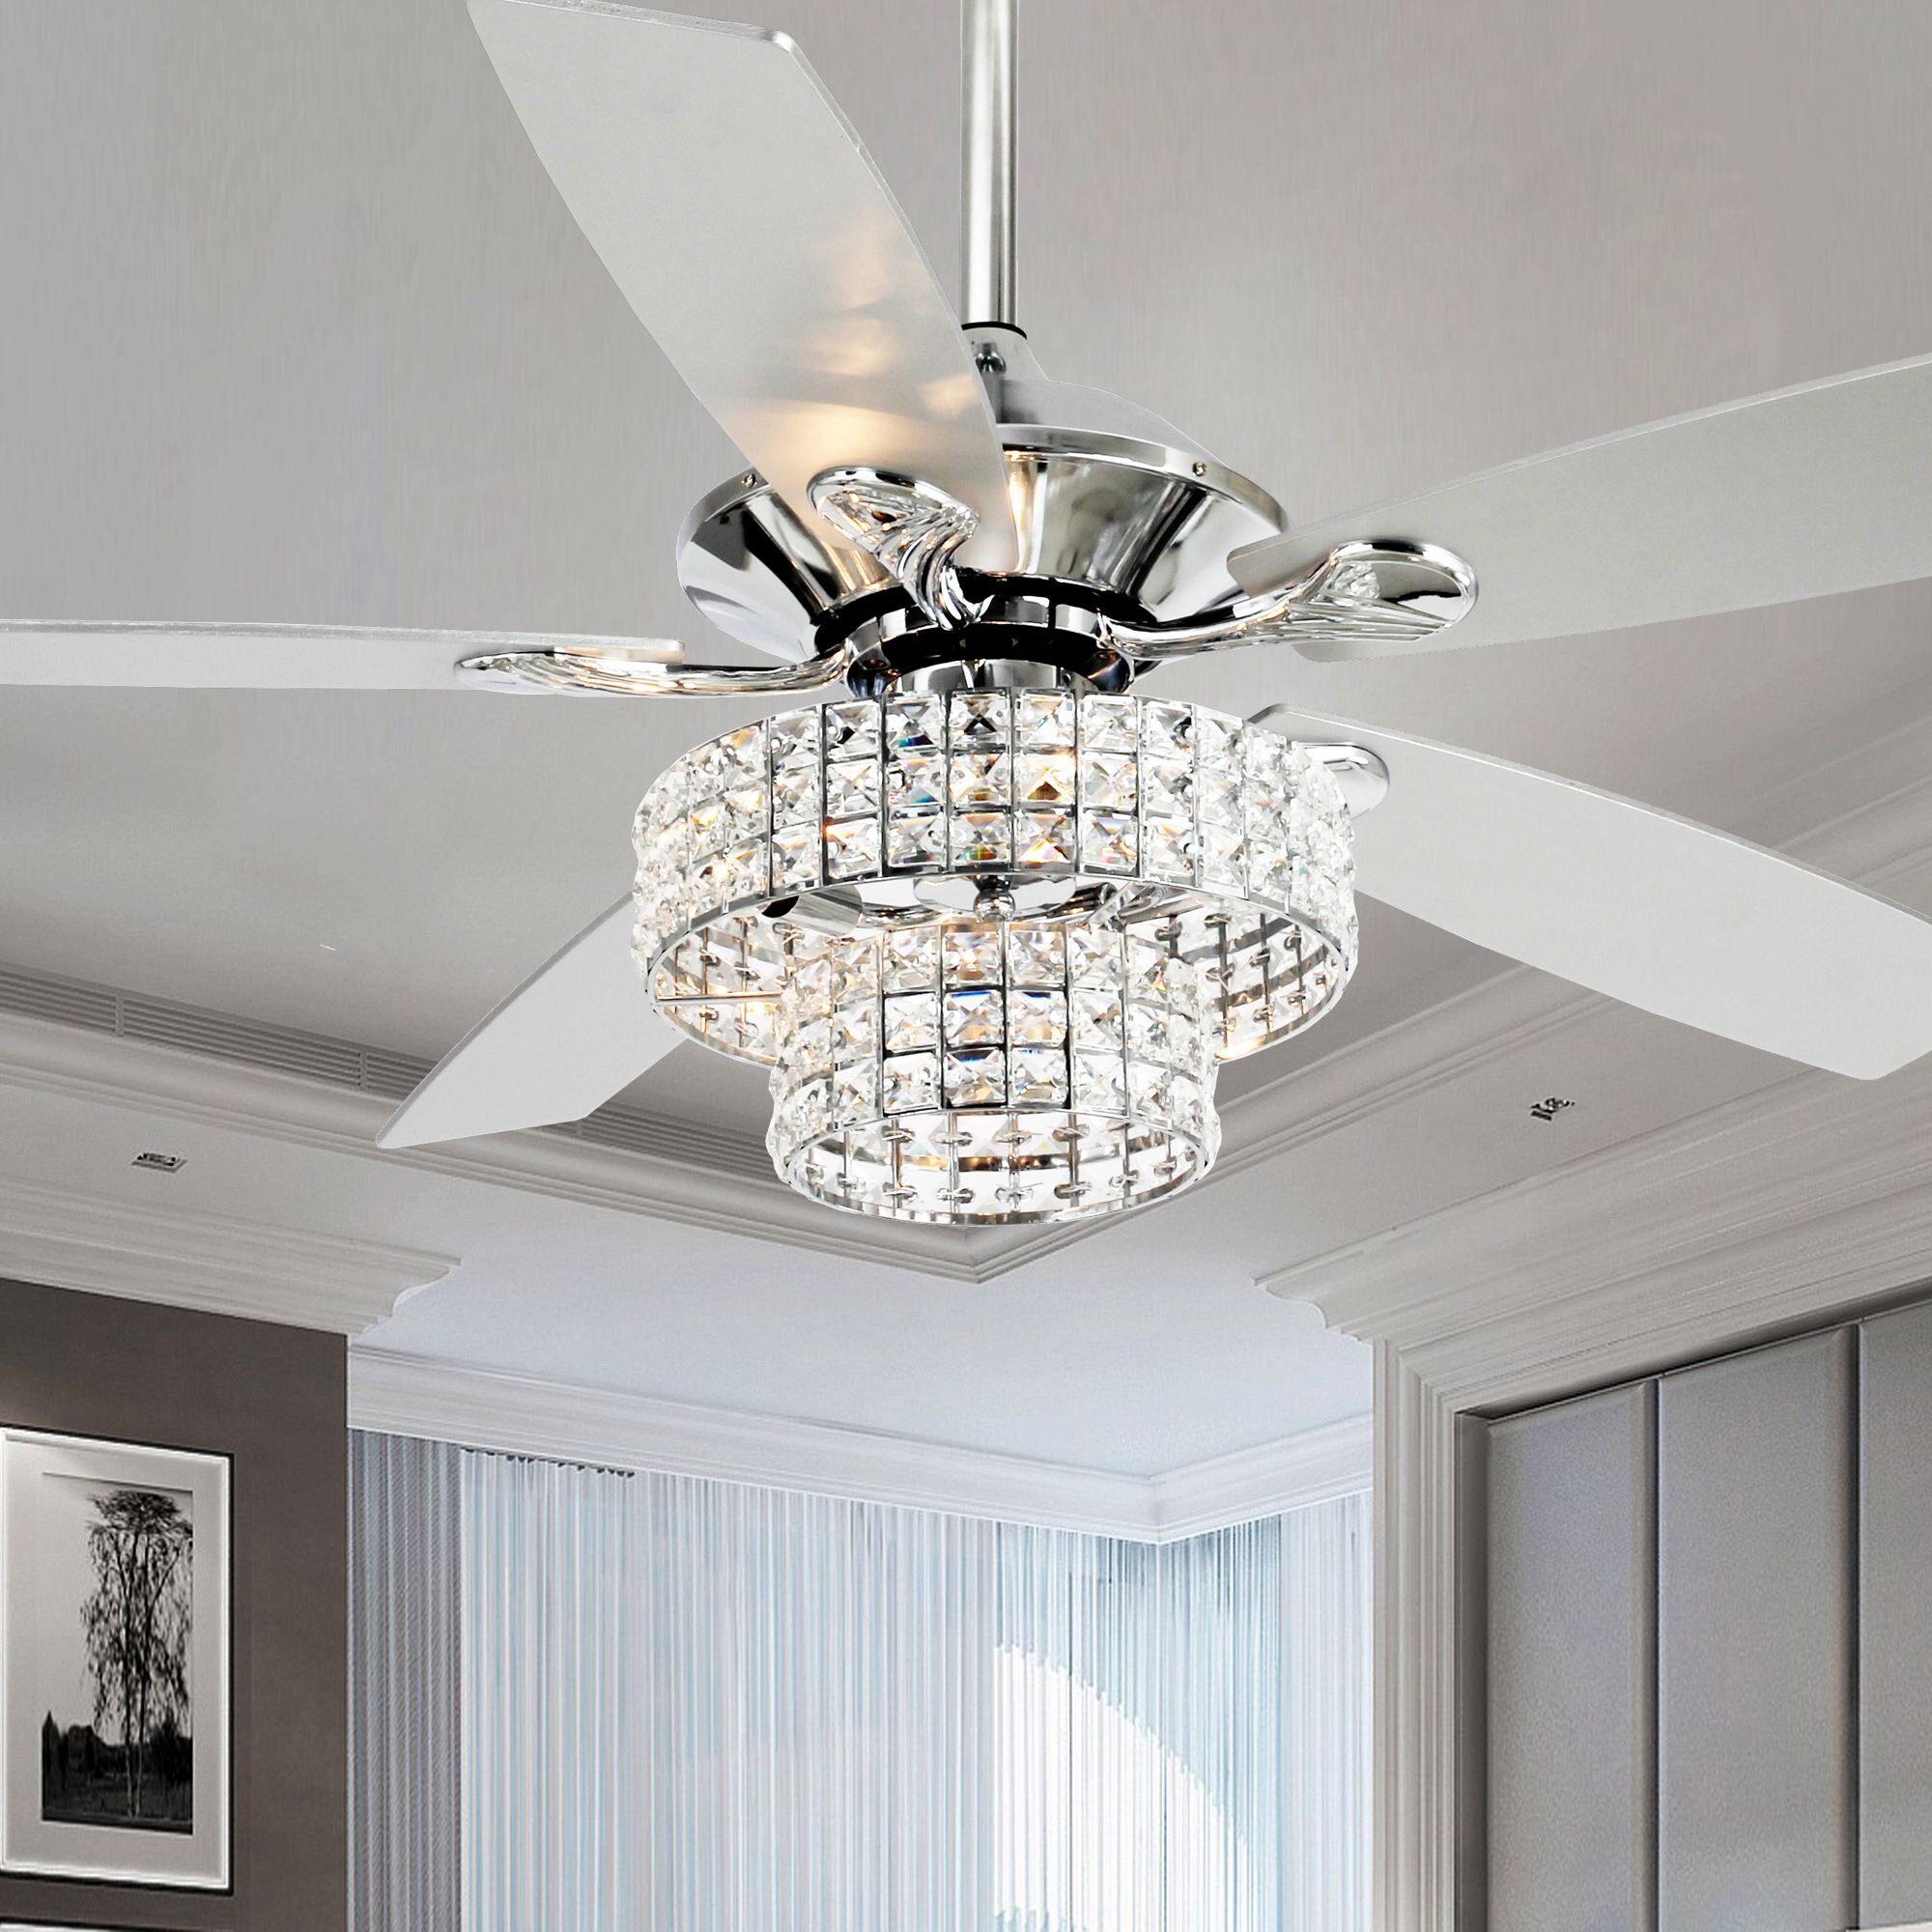 House Of Hampton 52 Tippett 5 Blade Crystal Ceiling Fan With Remote Control And Light Kit Included Reviews Wayfair